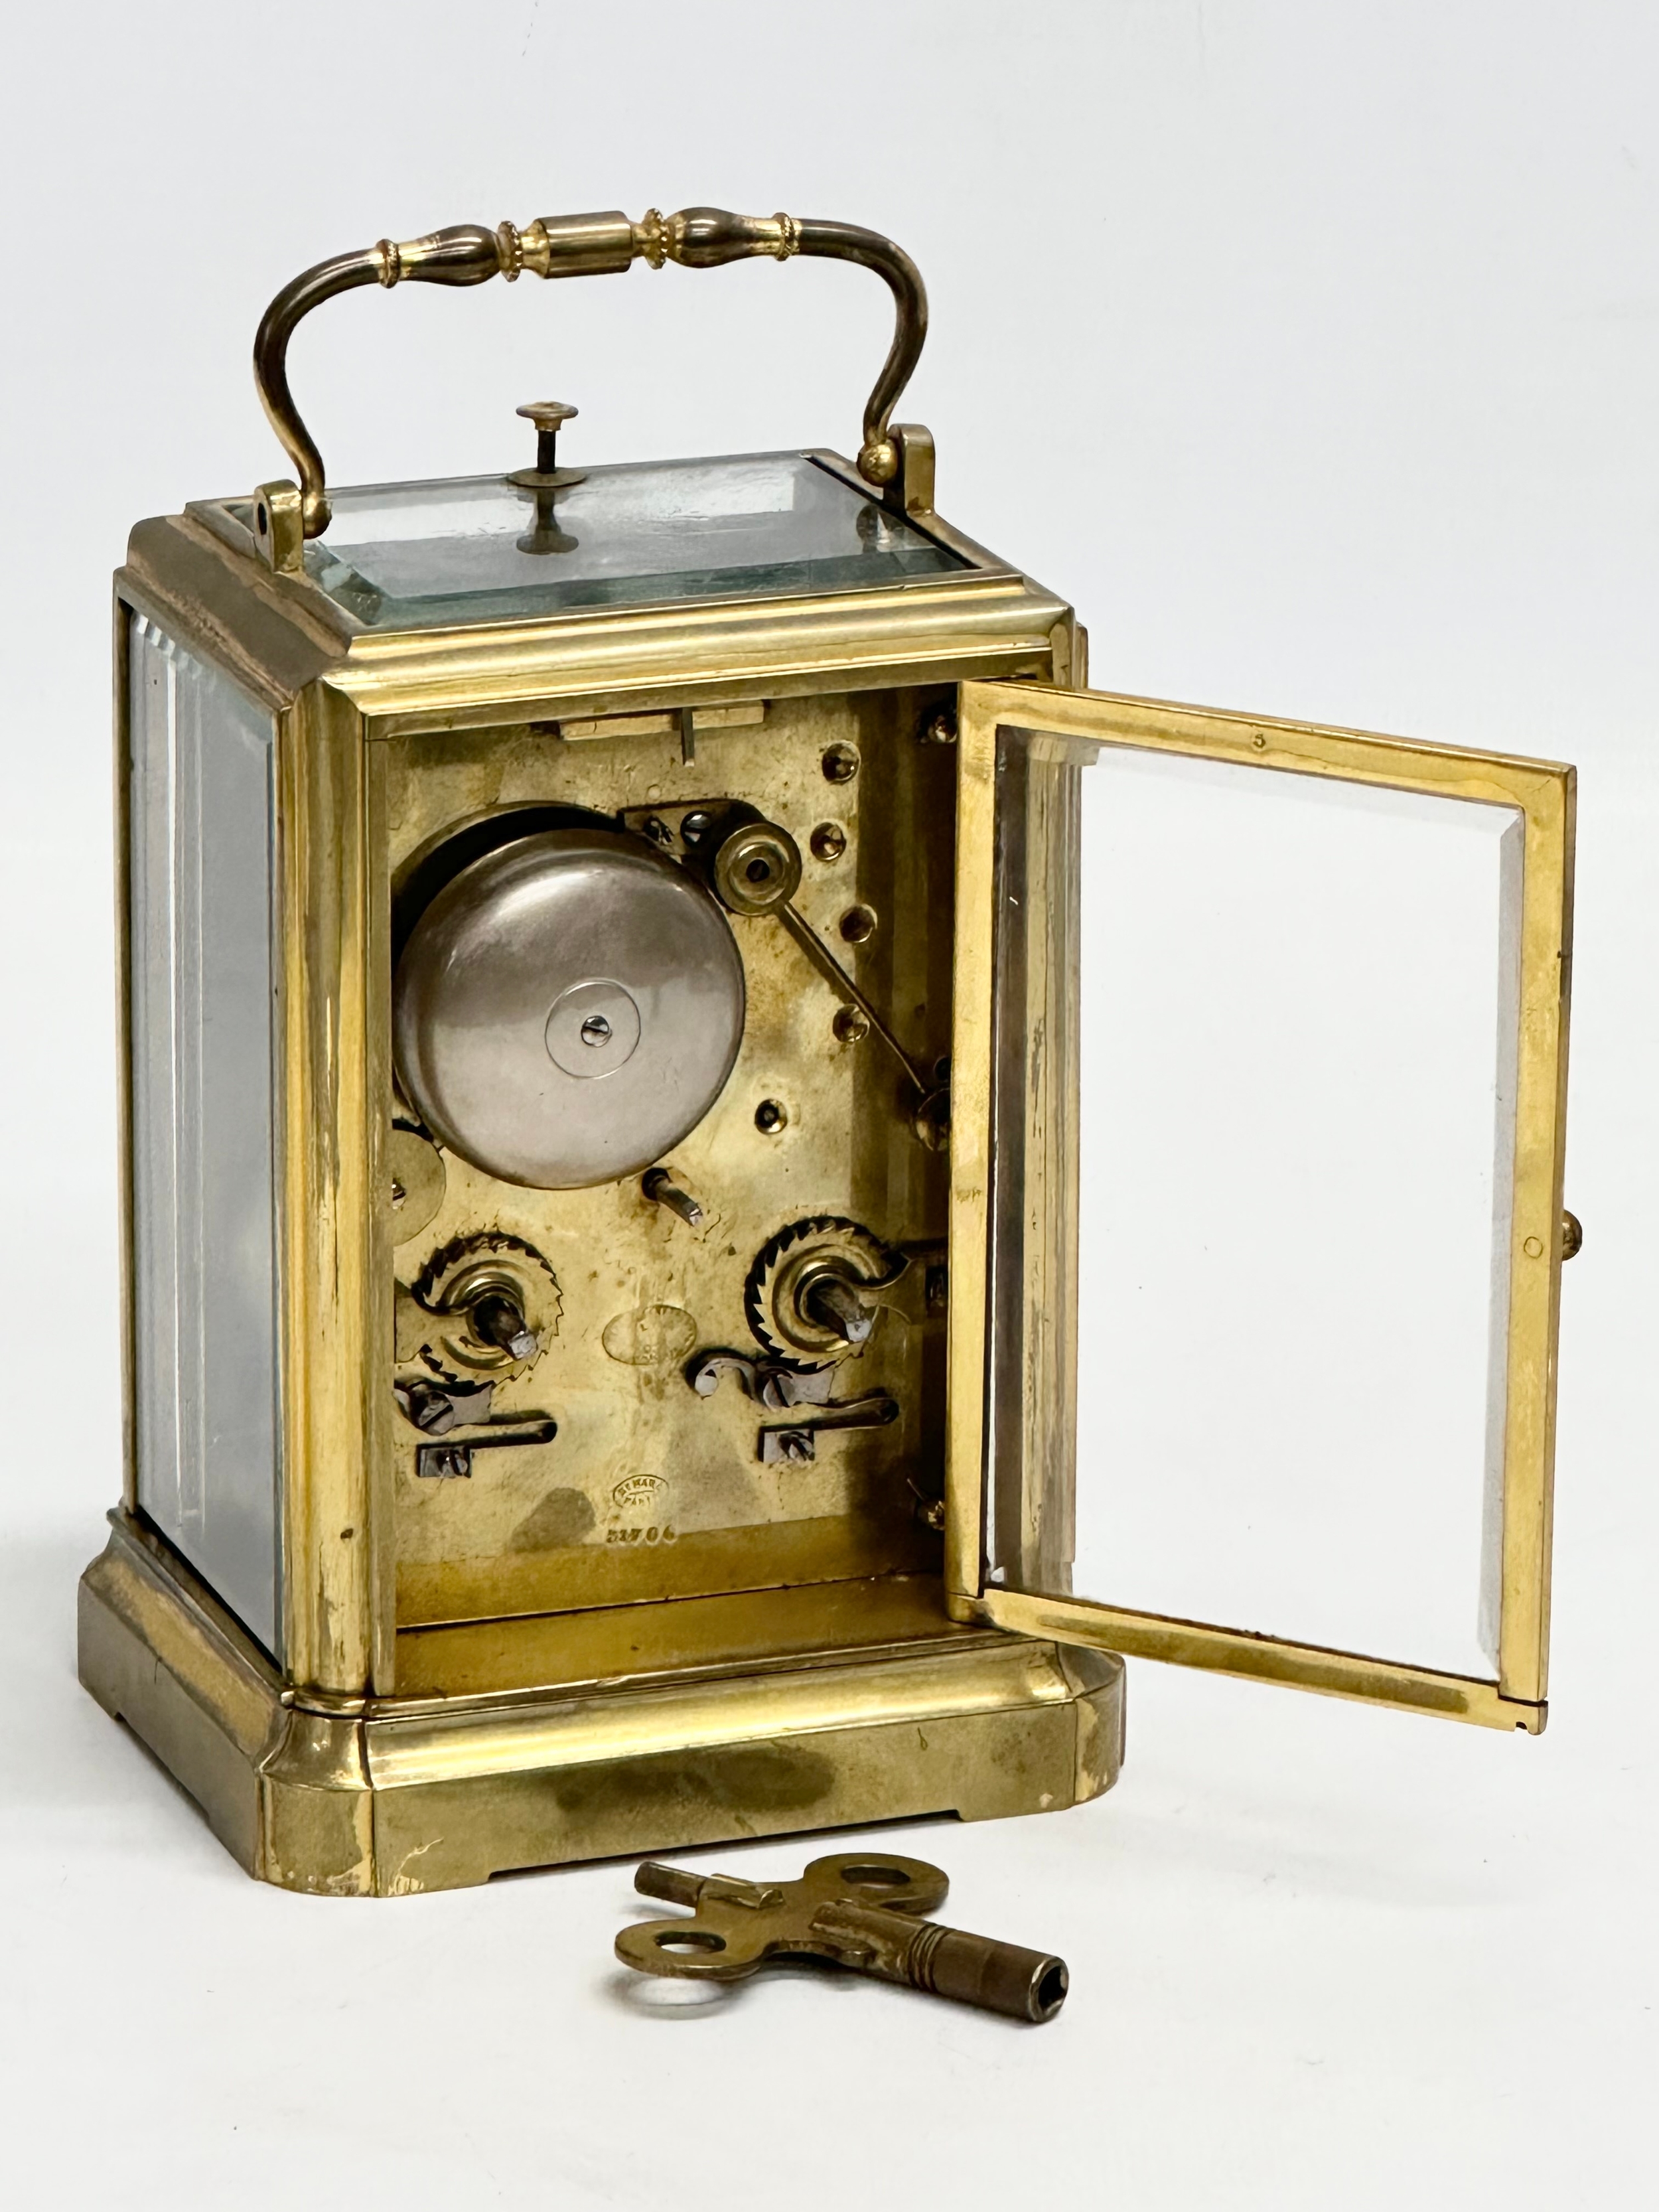 A rare mid 19th century Henry Marc brass Time Repeater Carriage Clock with 4 bevelled glass panels - Image 4 of 6